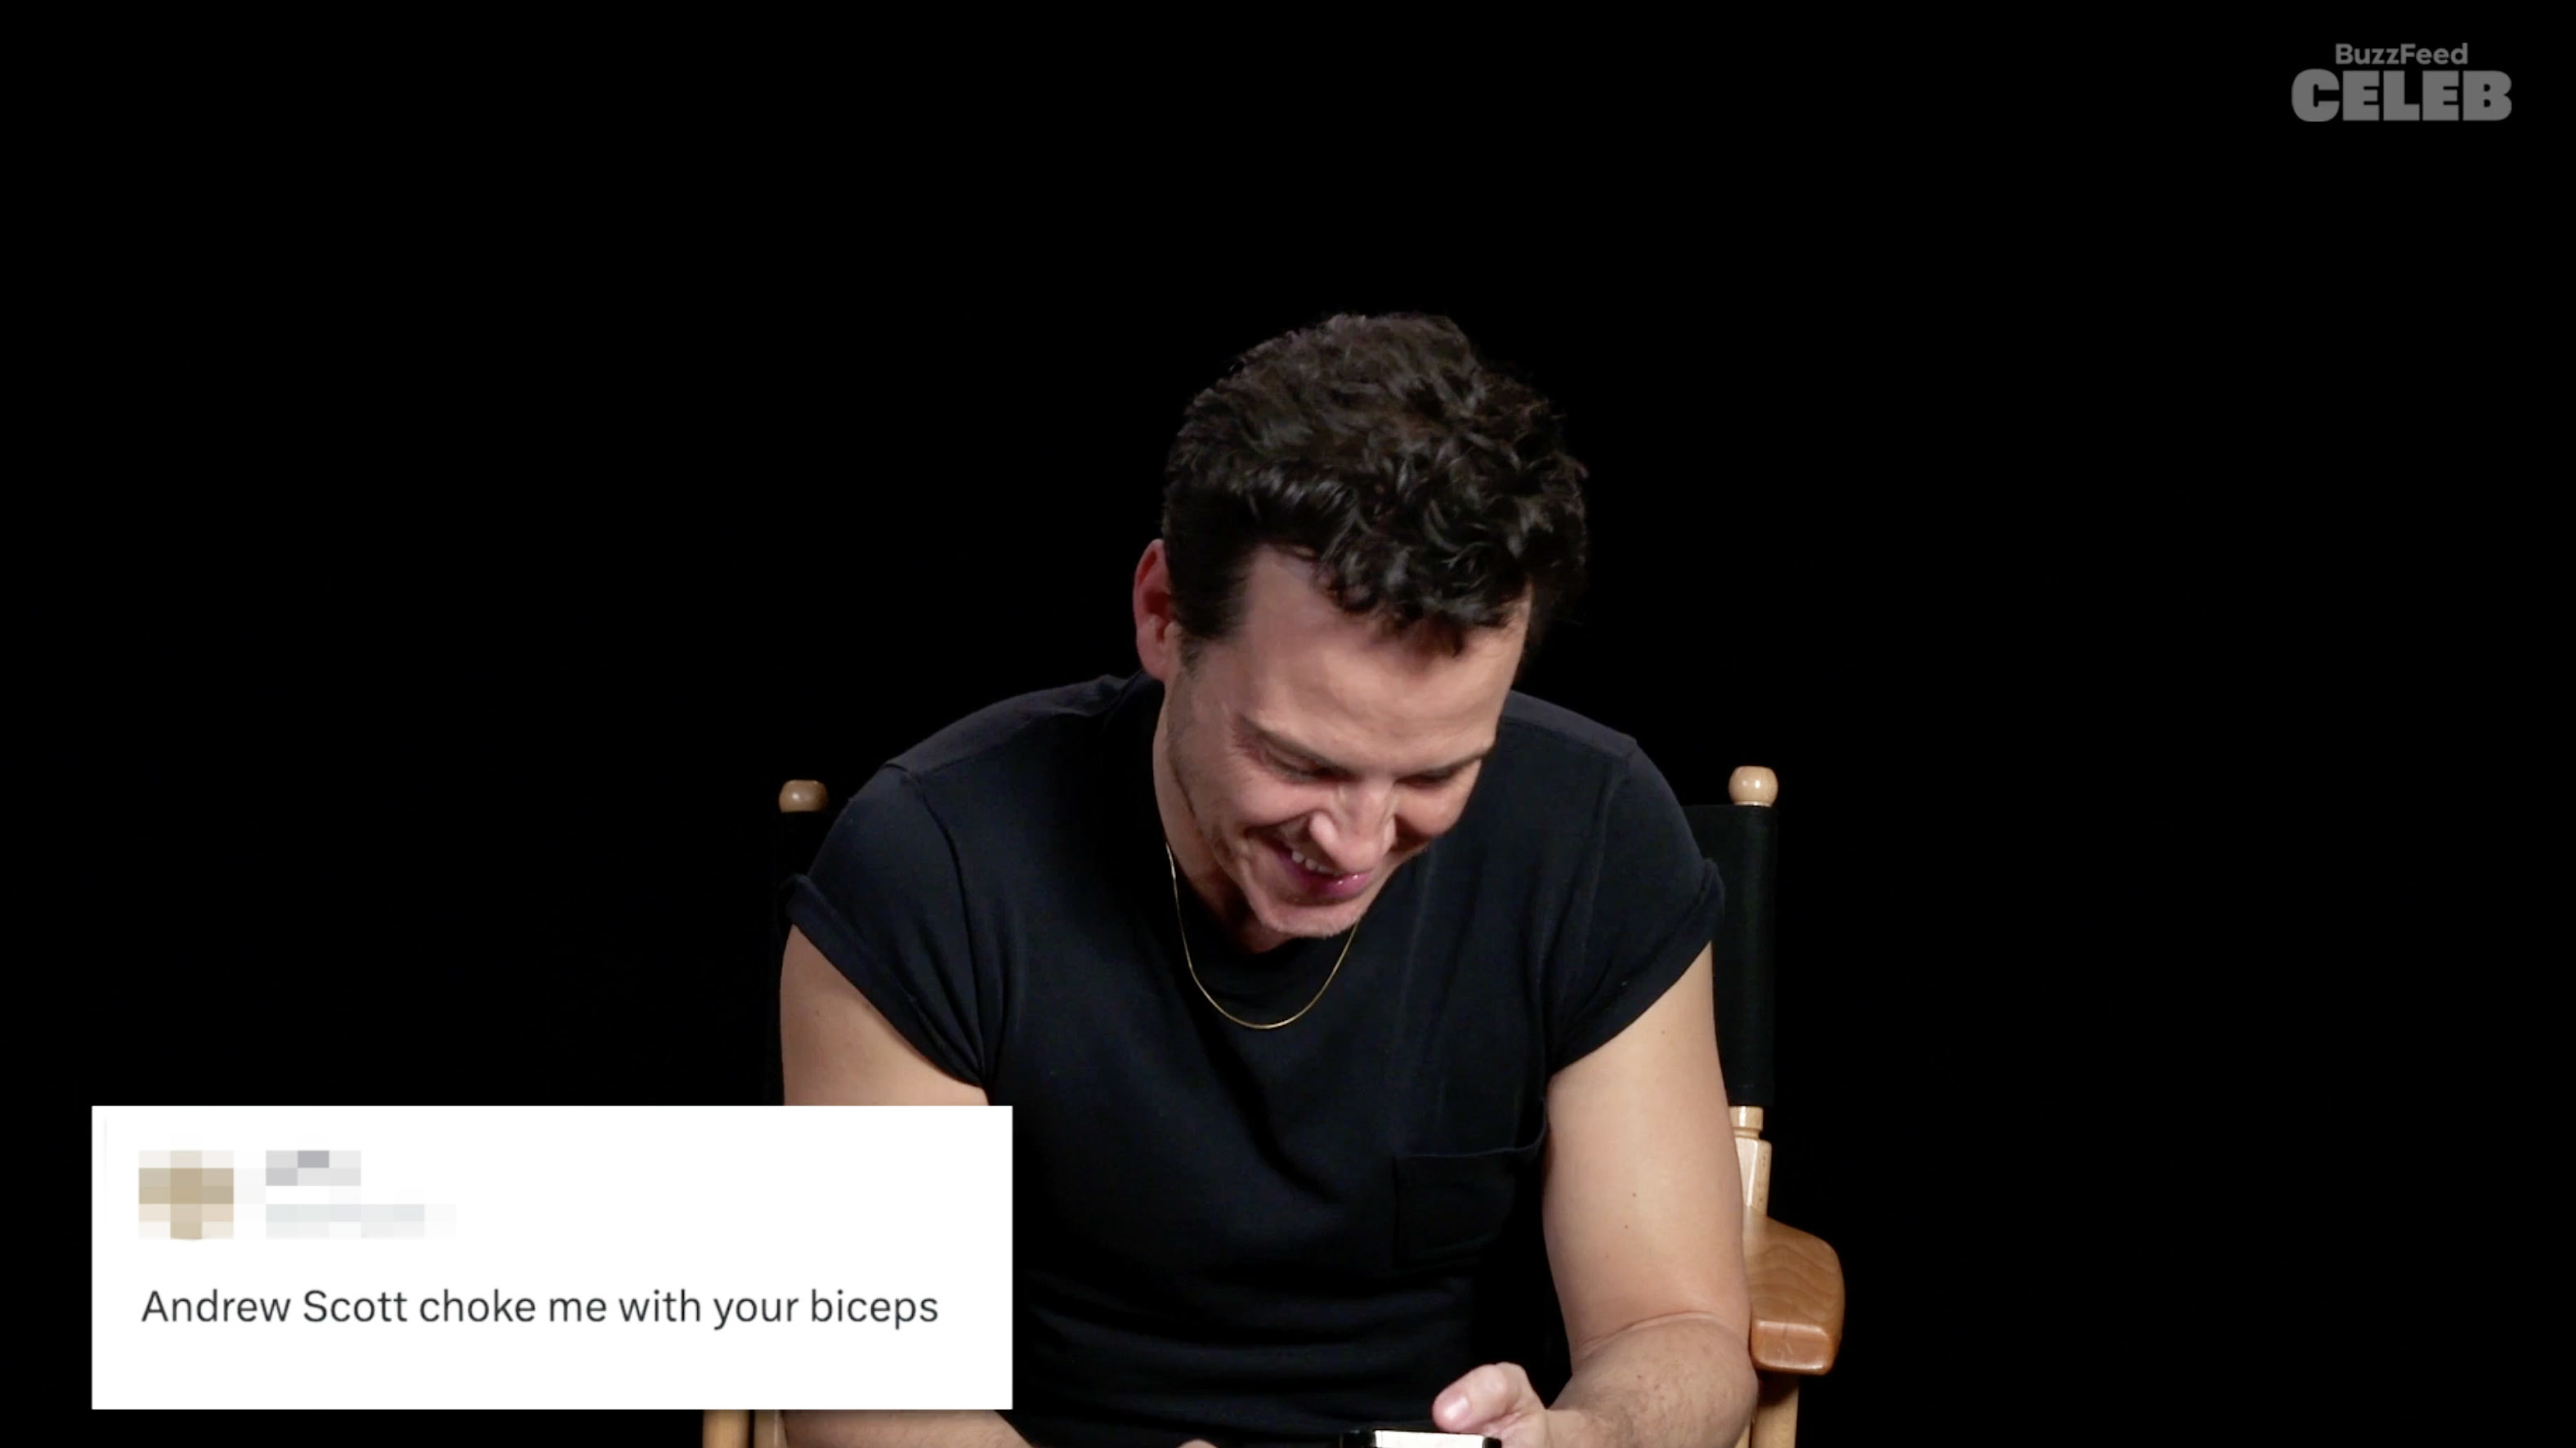 Andrew Scott smiles and looks down, seated before a screen displaying a playful message from a fan